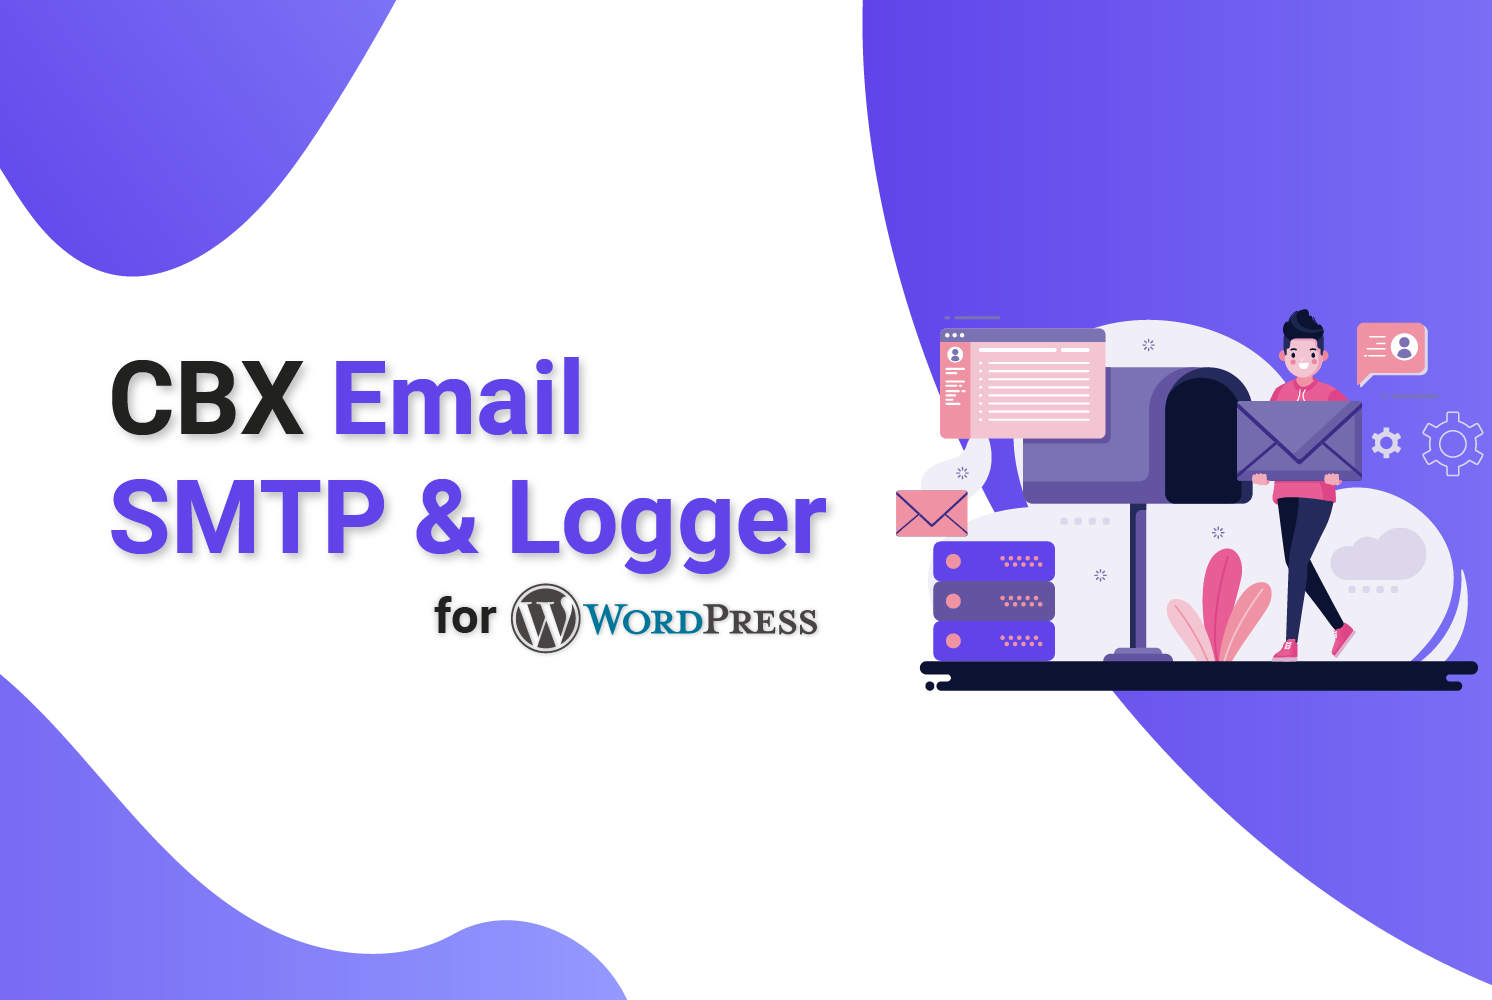 CBX Email SMTP & Logger for WordPress